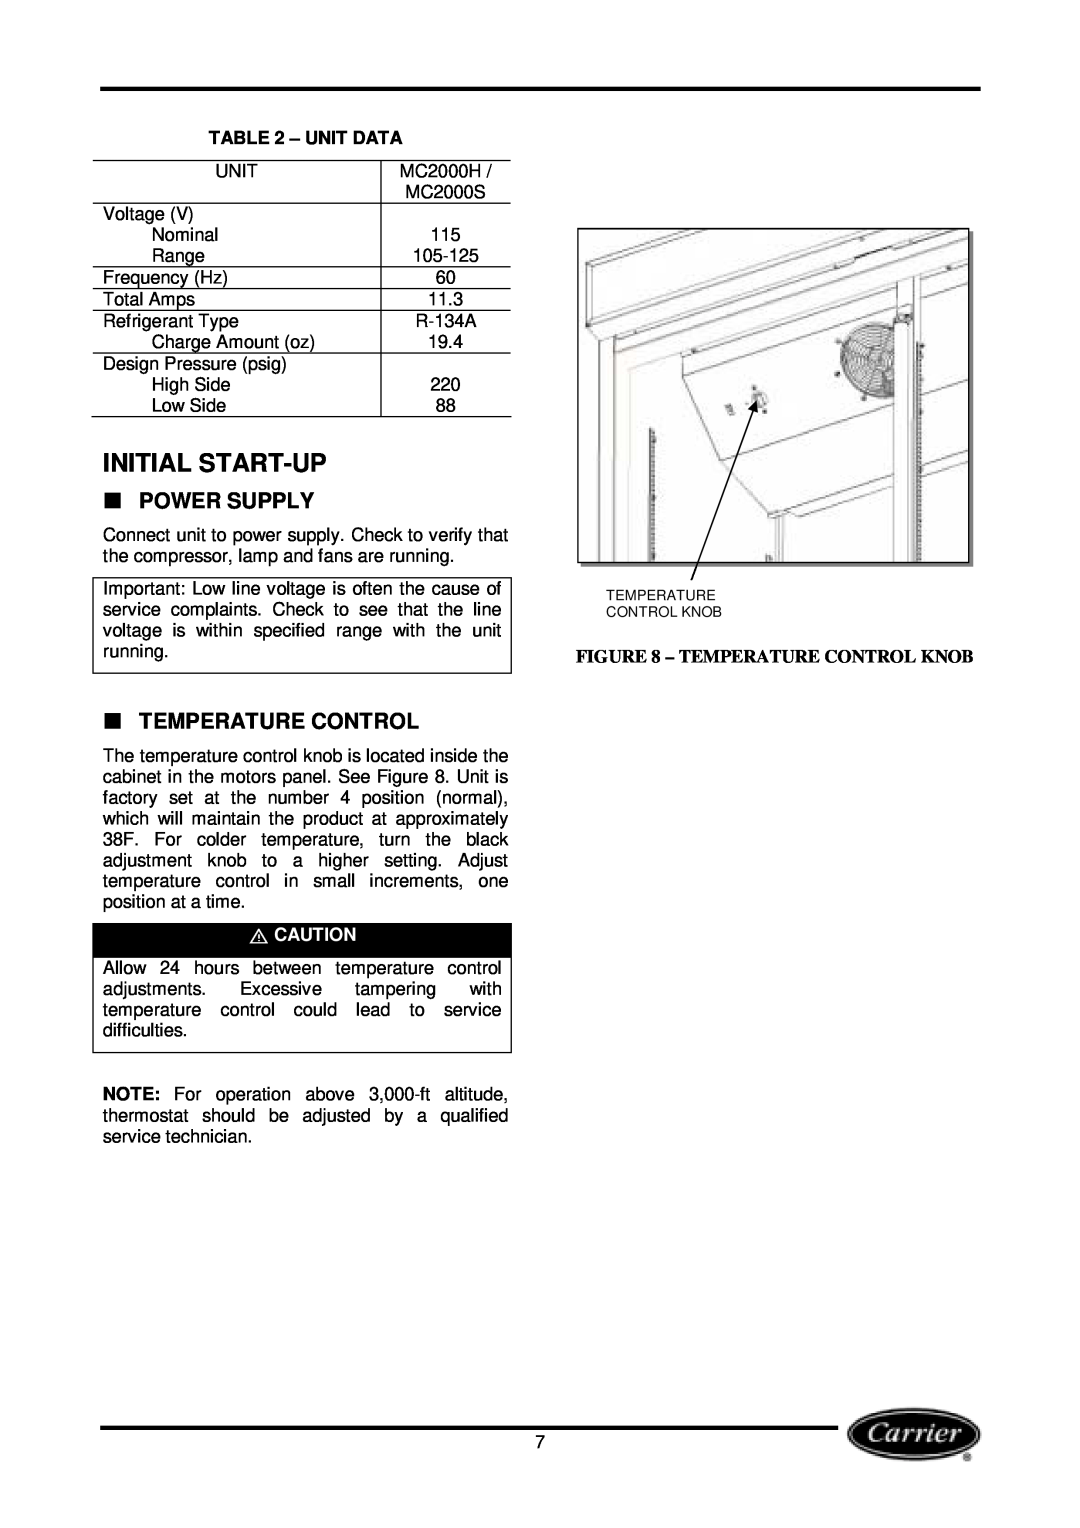 Carrier Miracool owner manual Initial Start-Up, Power Supply, Unit Data, Temperature Control Knob 